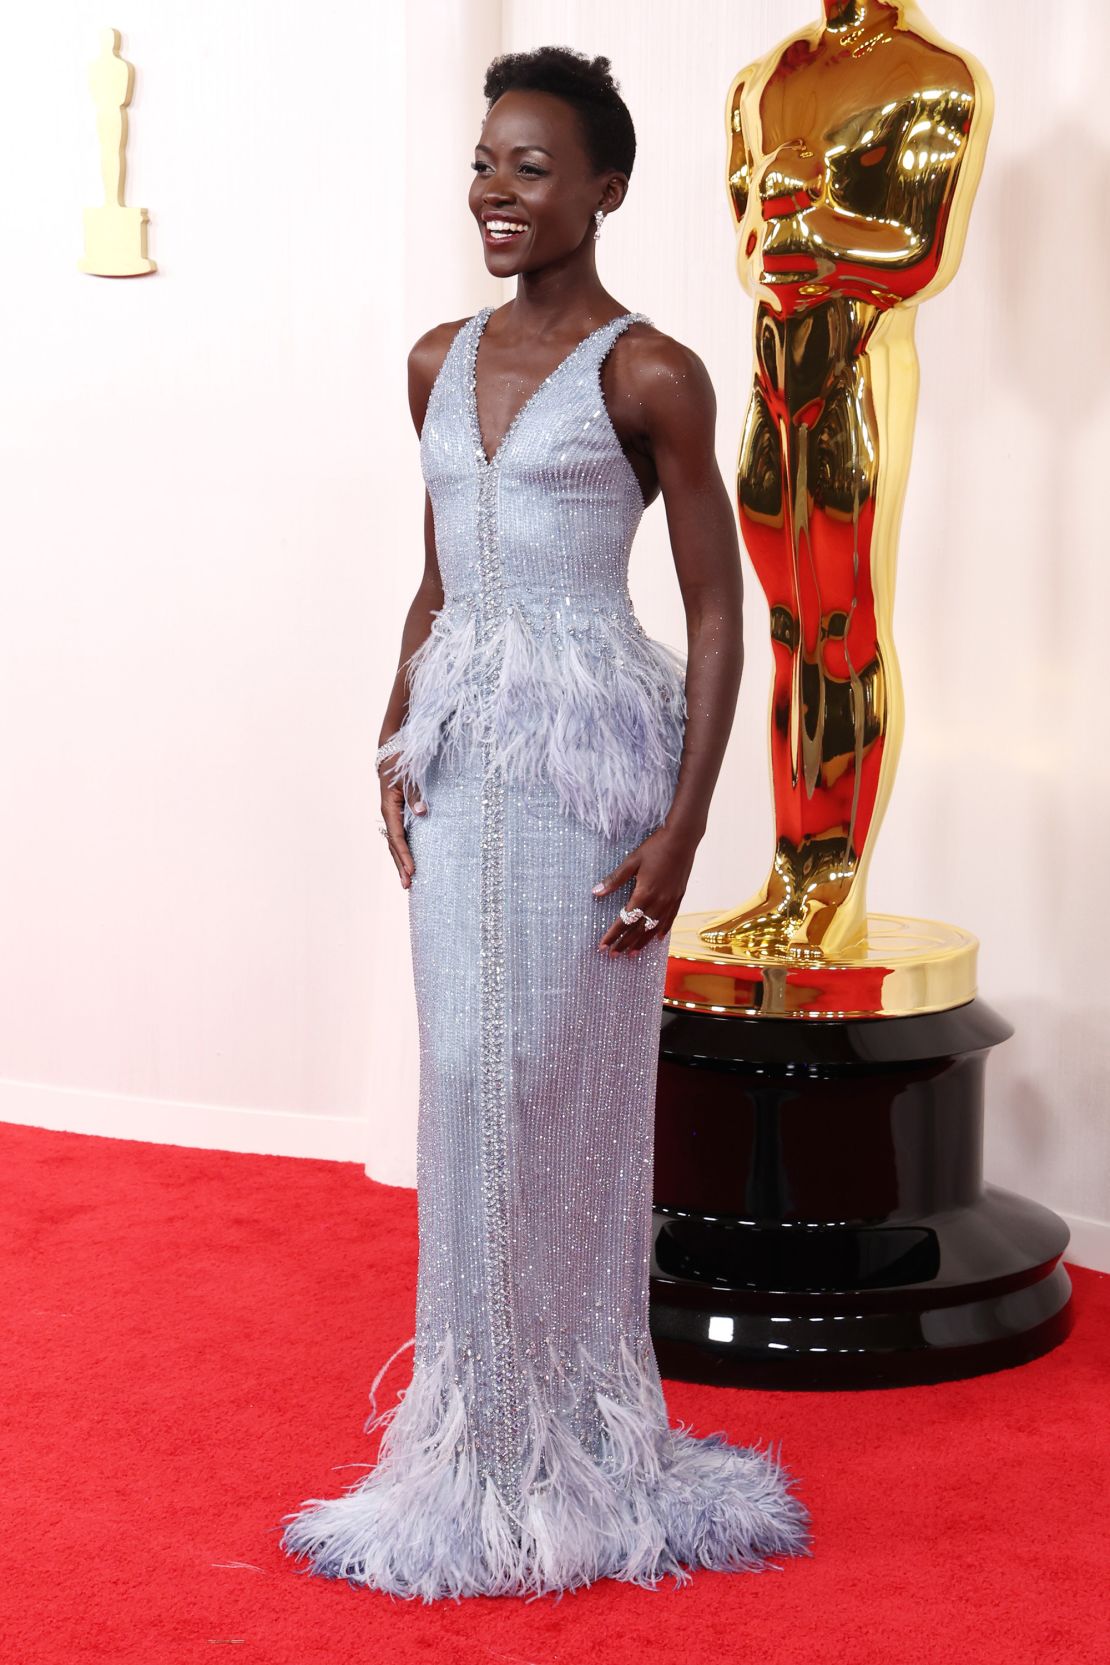 Lupita Nyong'o hit the red carpet in a stunning Armani Privé dress with feather embellishments at the waist and hem.  The actor accessorized with white gold jewelry from De Beers.